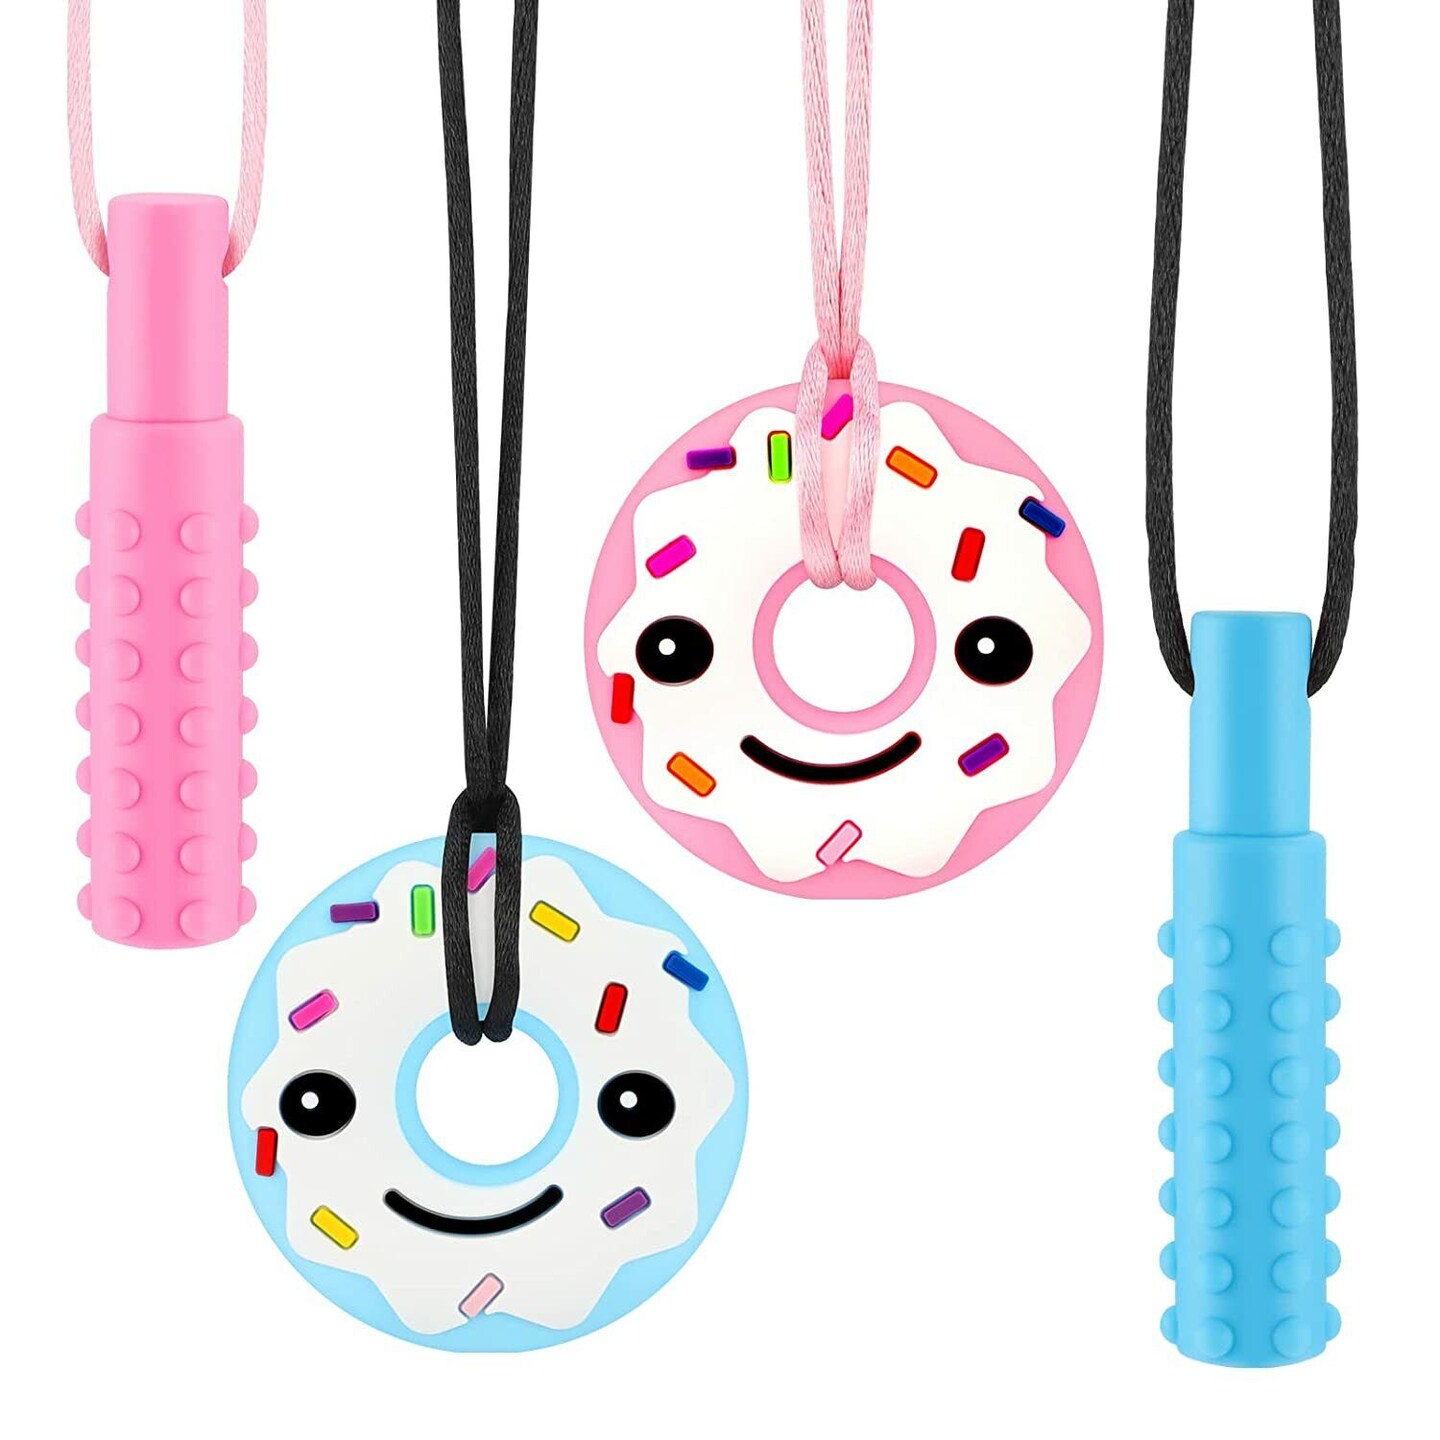 Sensory Chew Necklaces for Girls, 3 Pack Chewy Necklace for Sensory Kids,  Silicone Oral Chew Toys for Adults with ADHD, Autism, SPD, Special Needs,  Reduce Chewing Fidgeting